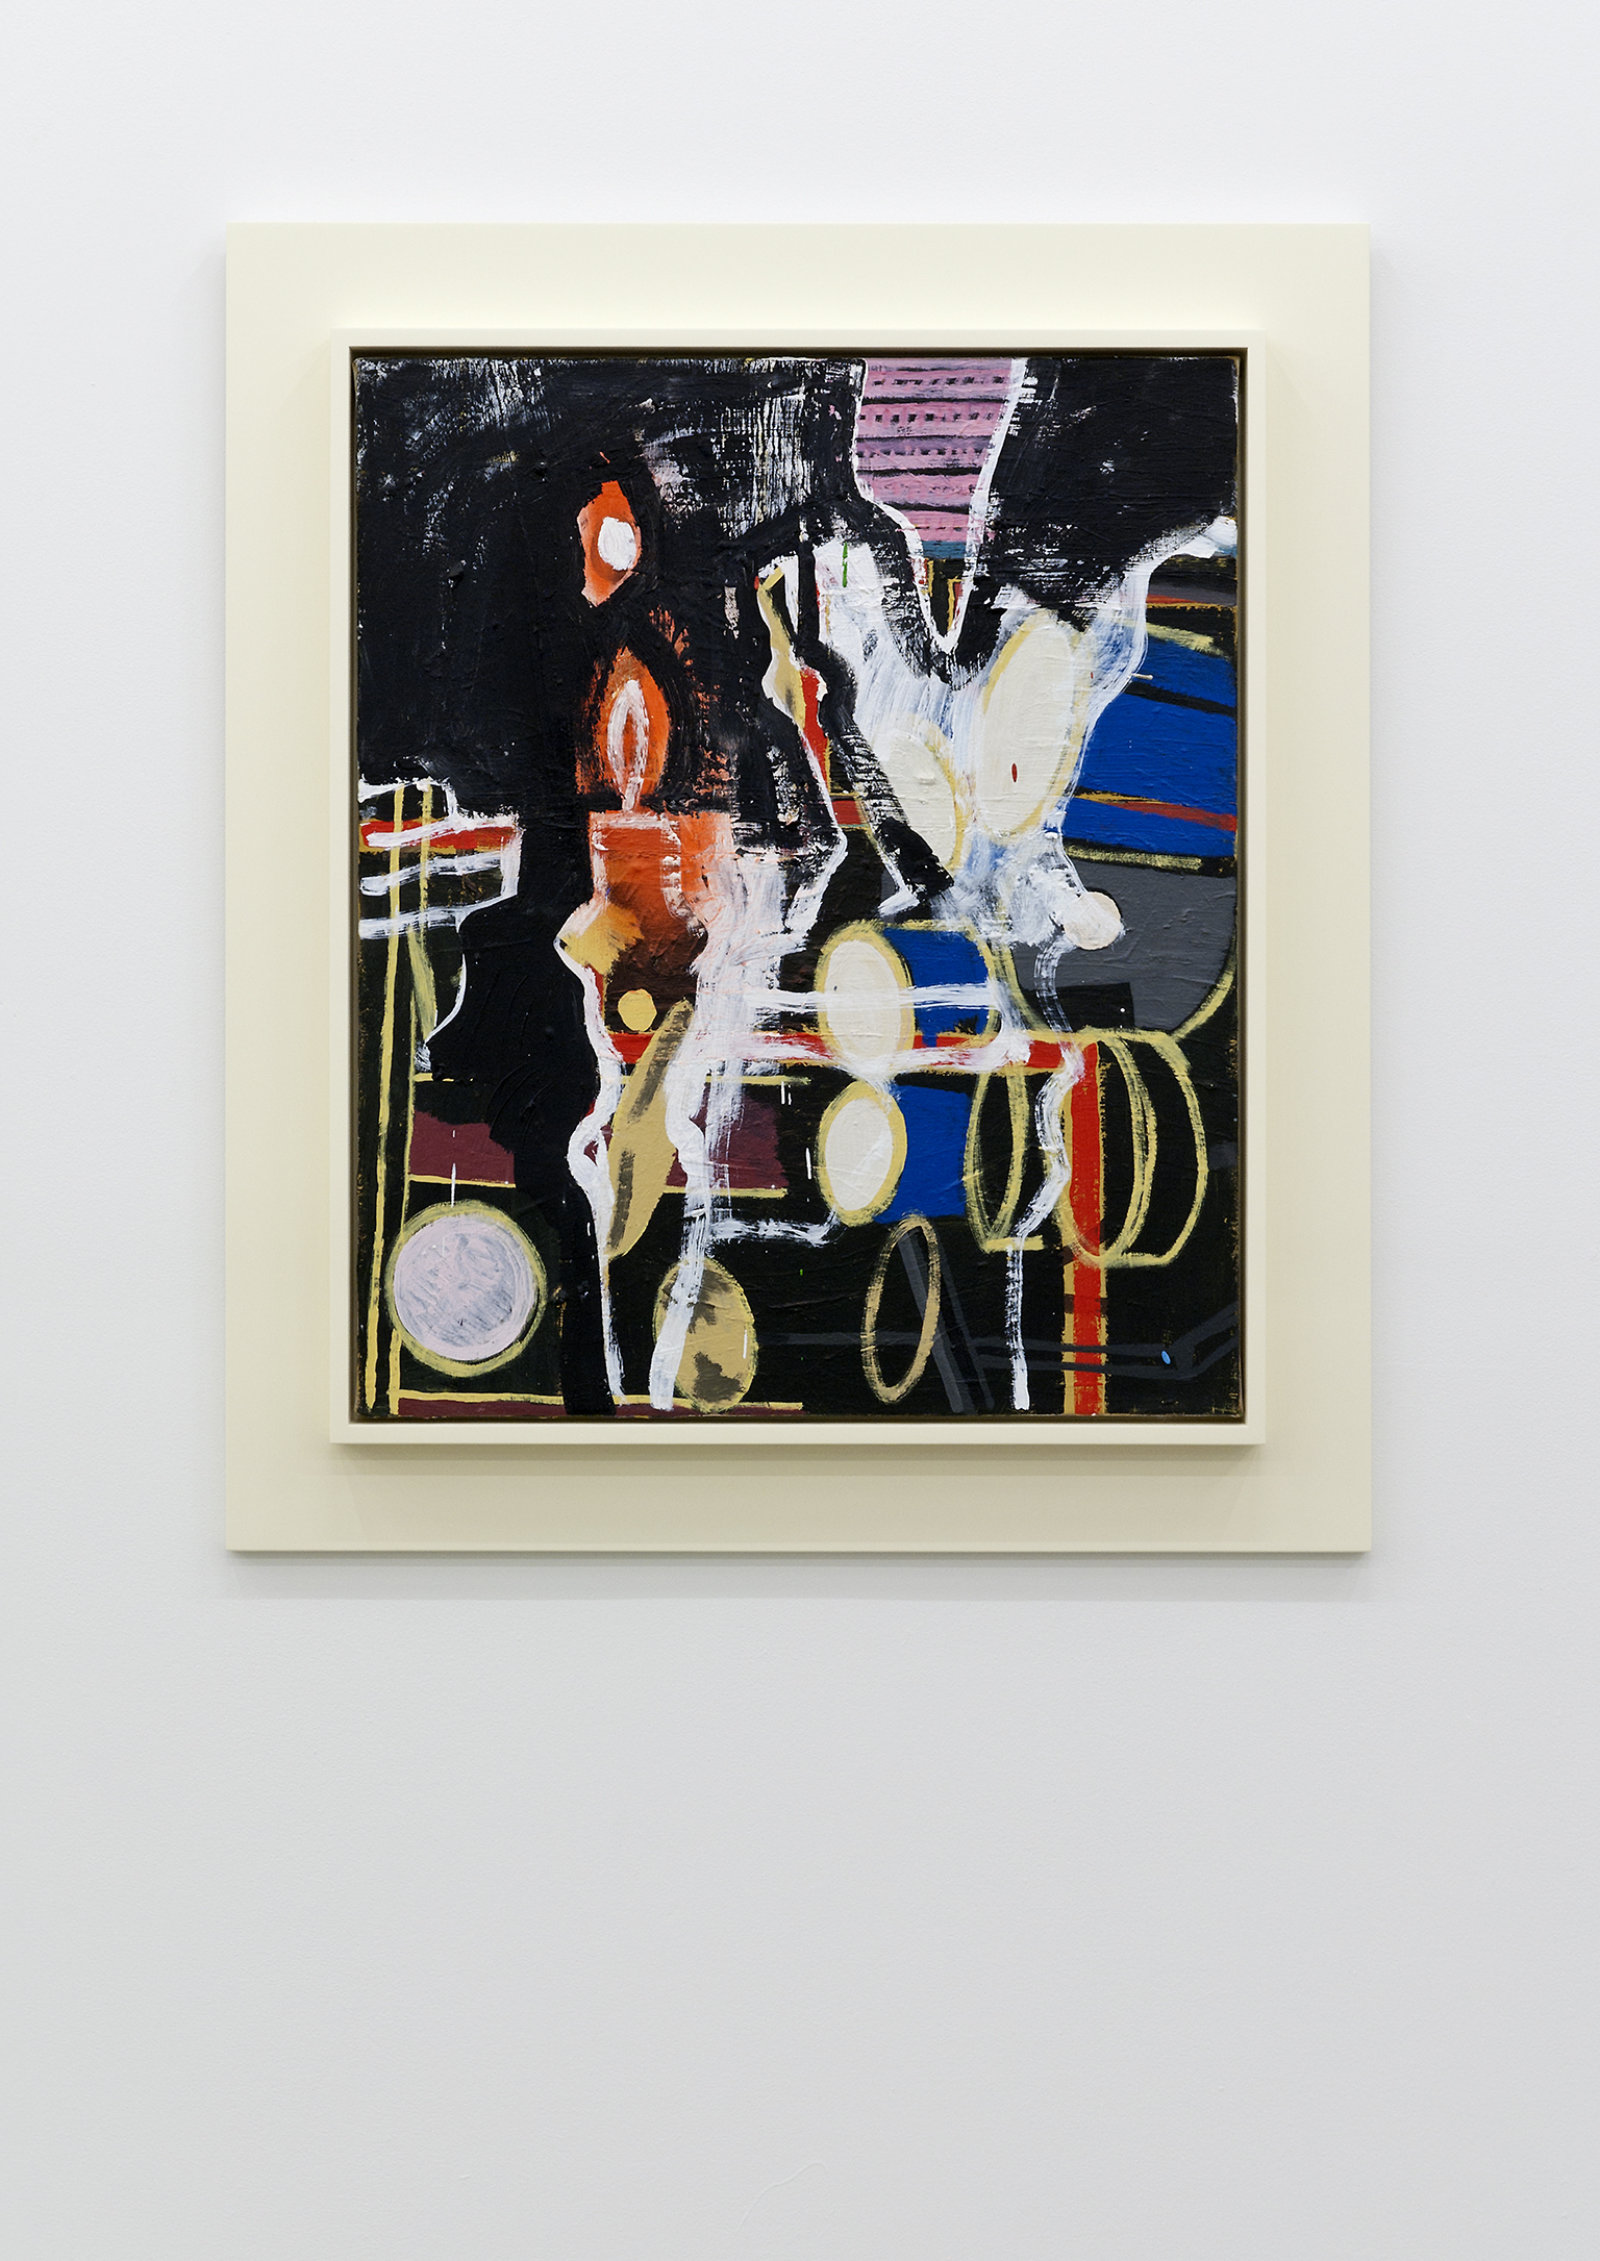 Damian Moppett, Candle #1, 2010, oil and spray enamel on canvas and wood frame, 36 x 32 in. (90 x 80 cm)